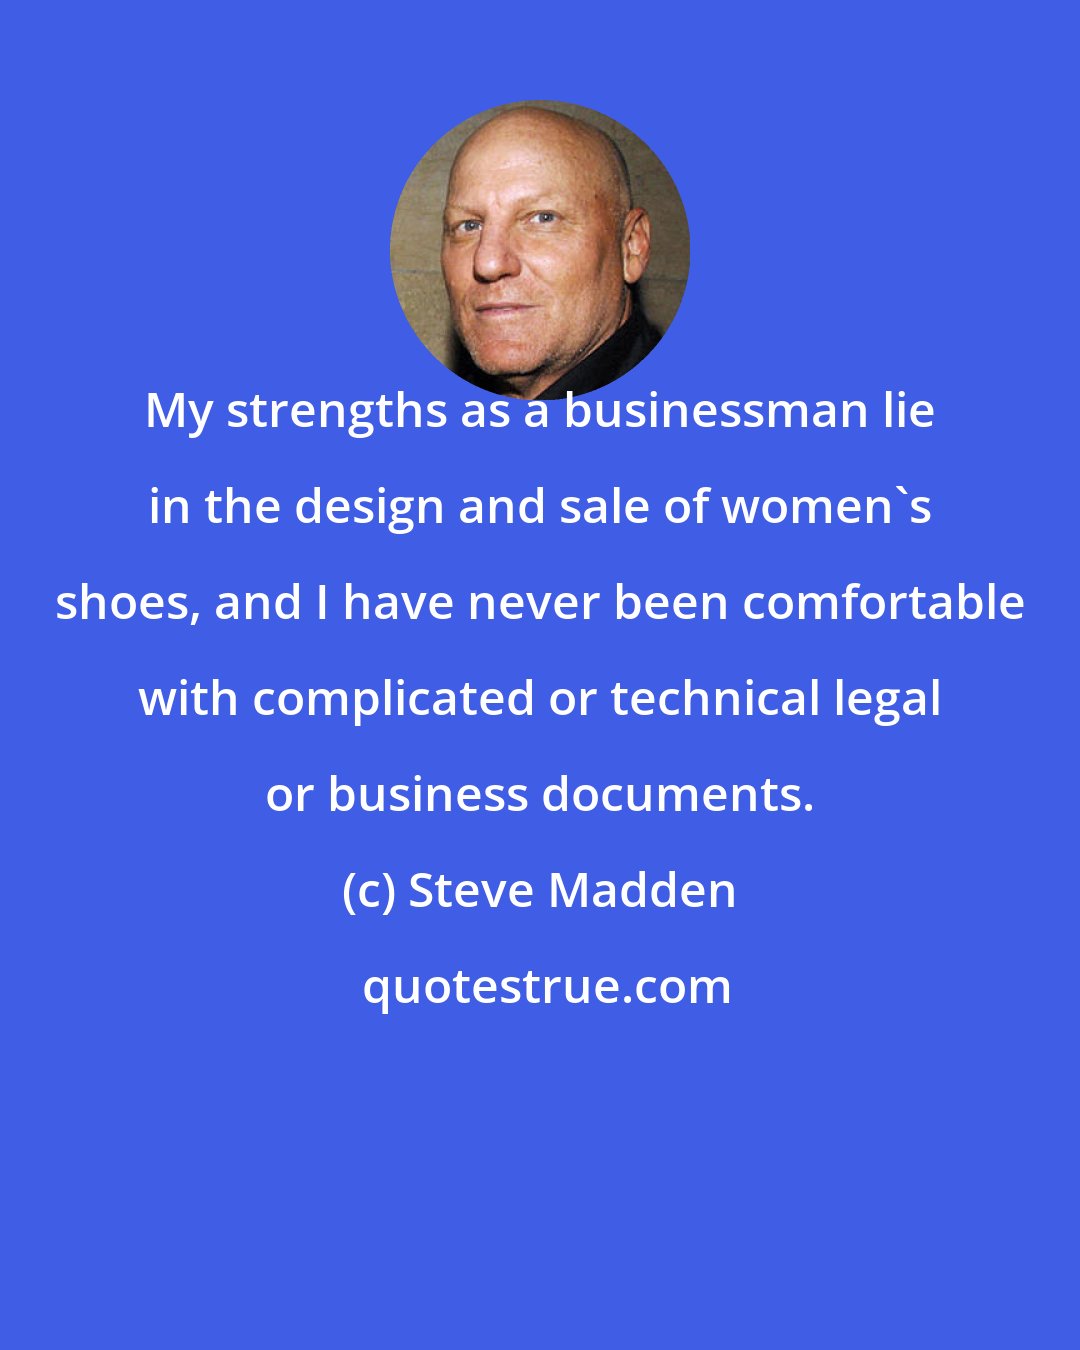 Steve Madden: My strengths as a businessman lie in the design and sale of women's shoes, and I have never been comfortable with complicated or technical legal or business documents.